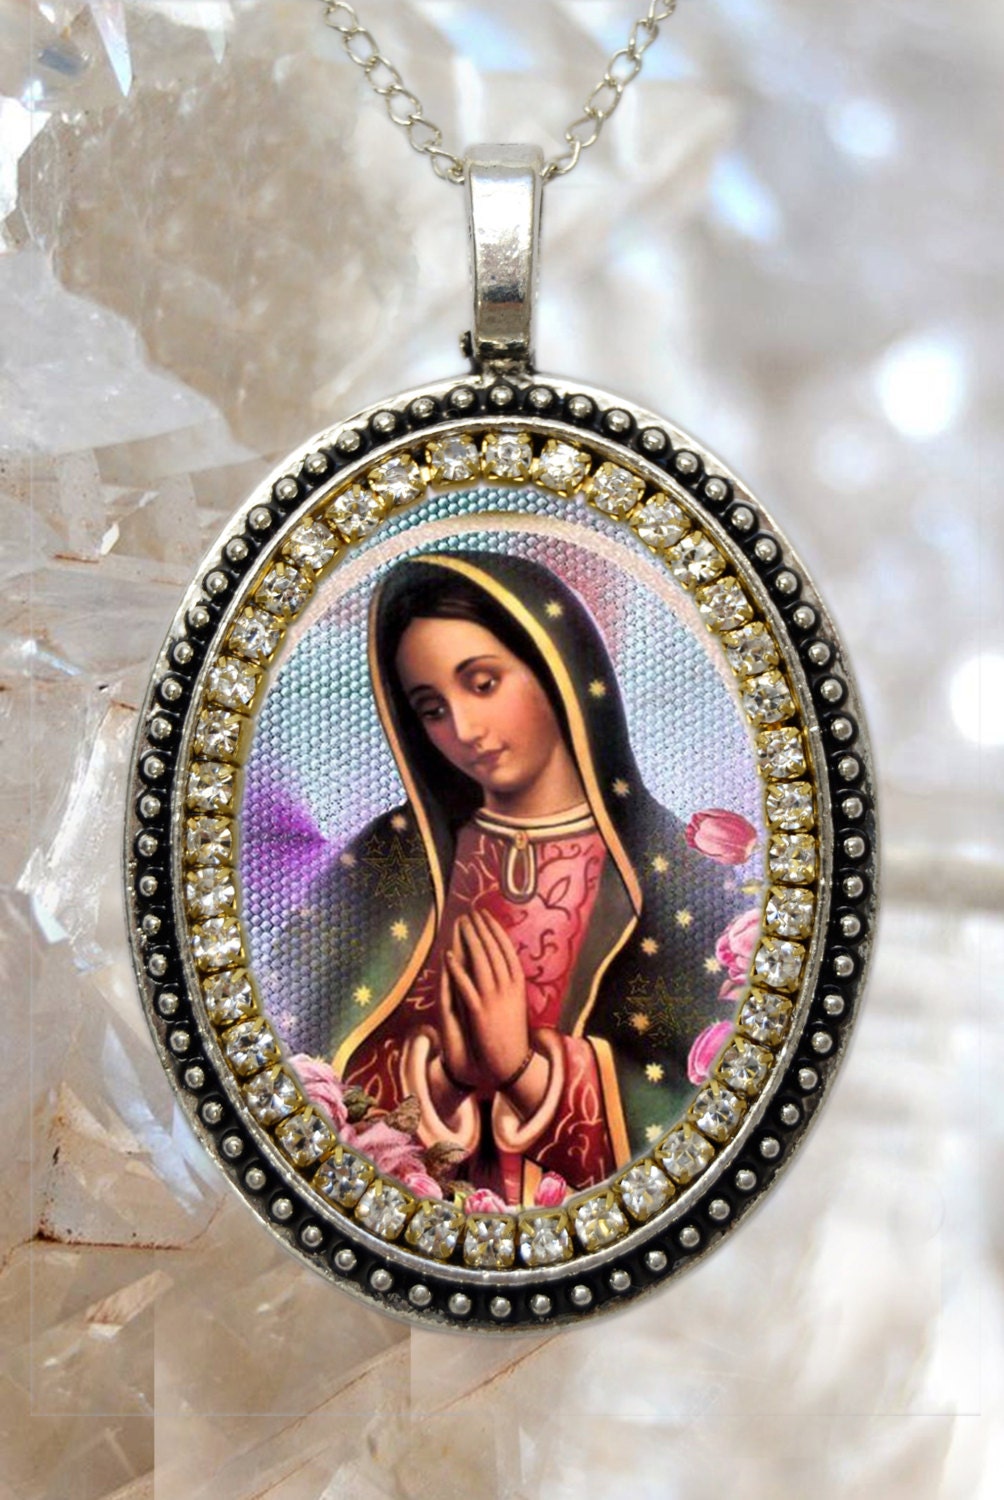 Our Lady of Guadalupe Necklace - Catholic Jewelry by The Little Catholic